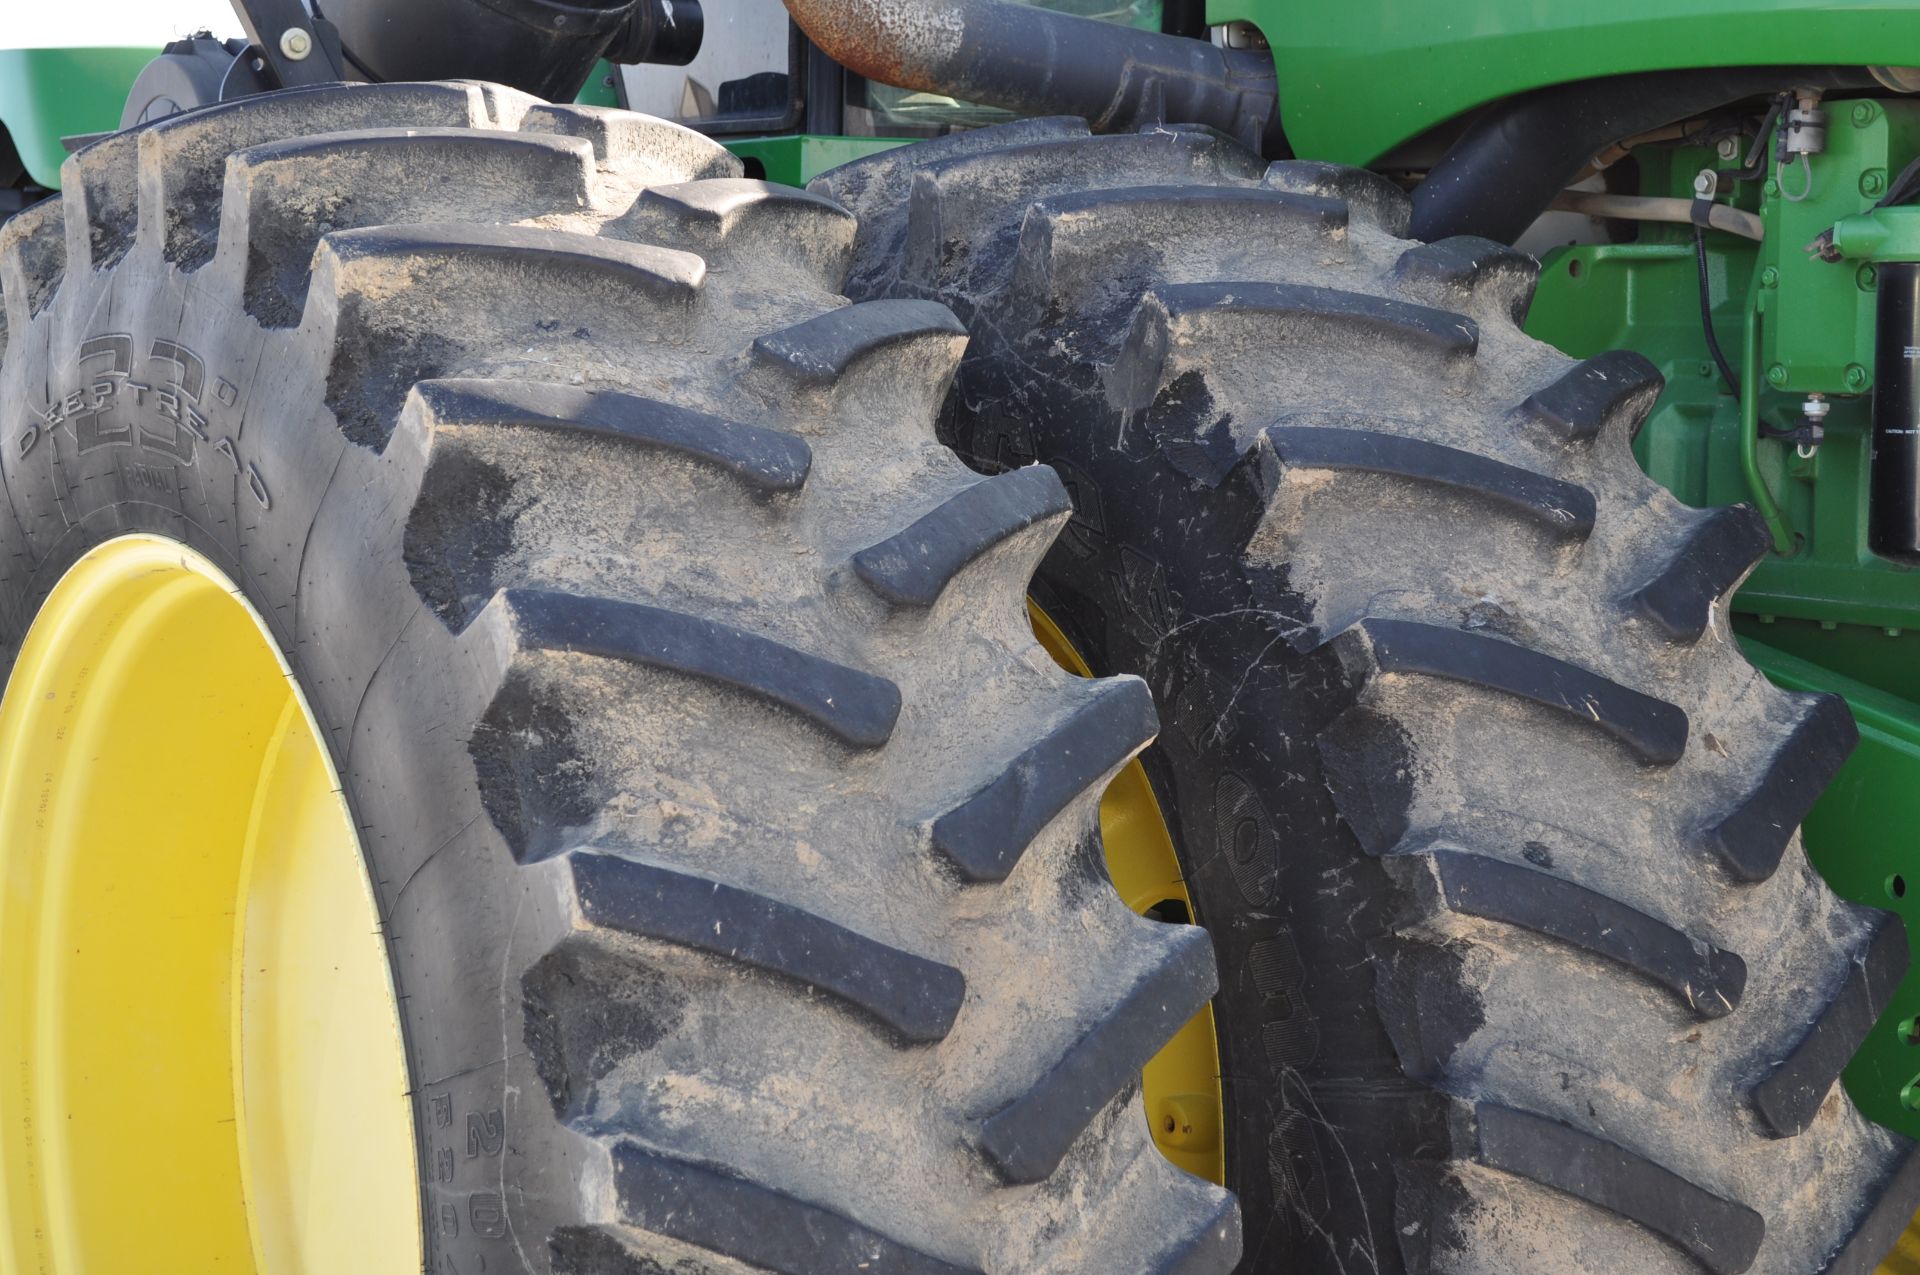 John Deere 9220 tractor, 4WD, 520/85R42 duals, power shift, rear wheel wts, 4 hyd remotes, 3pt, - Image 9 of 35